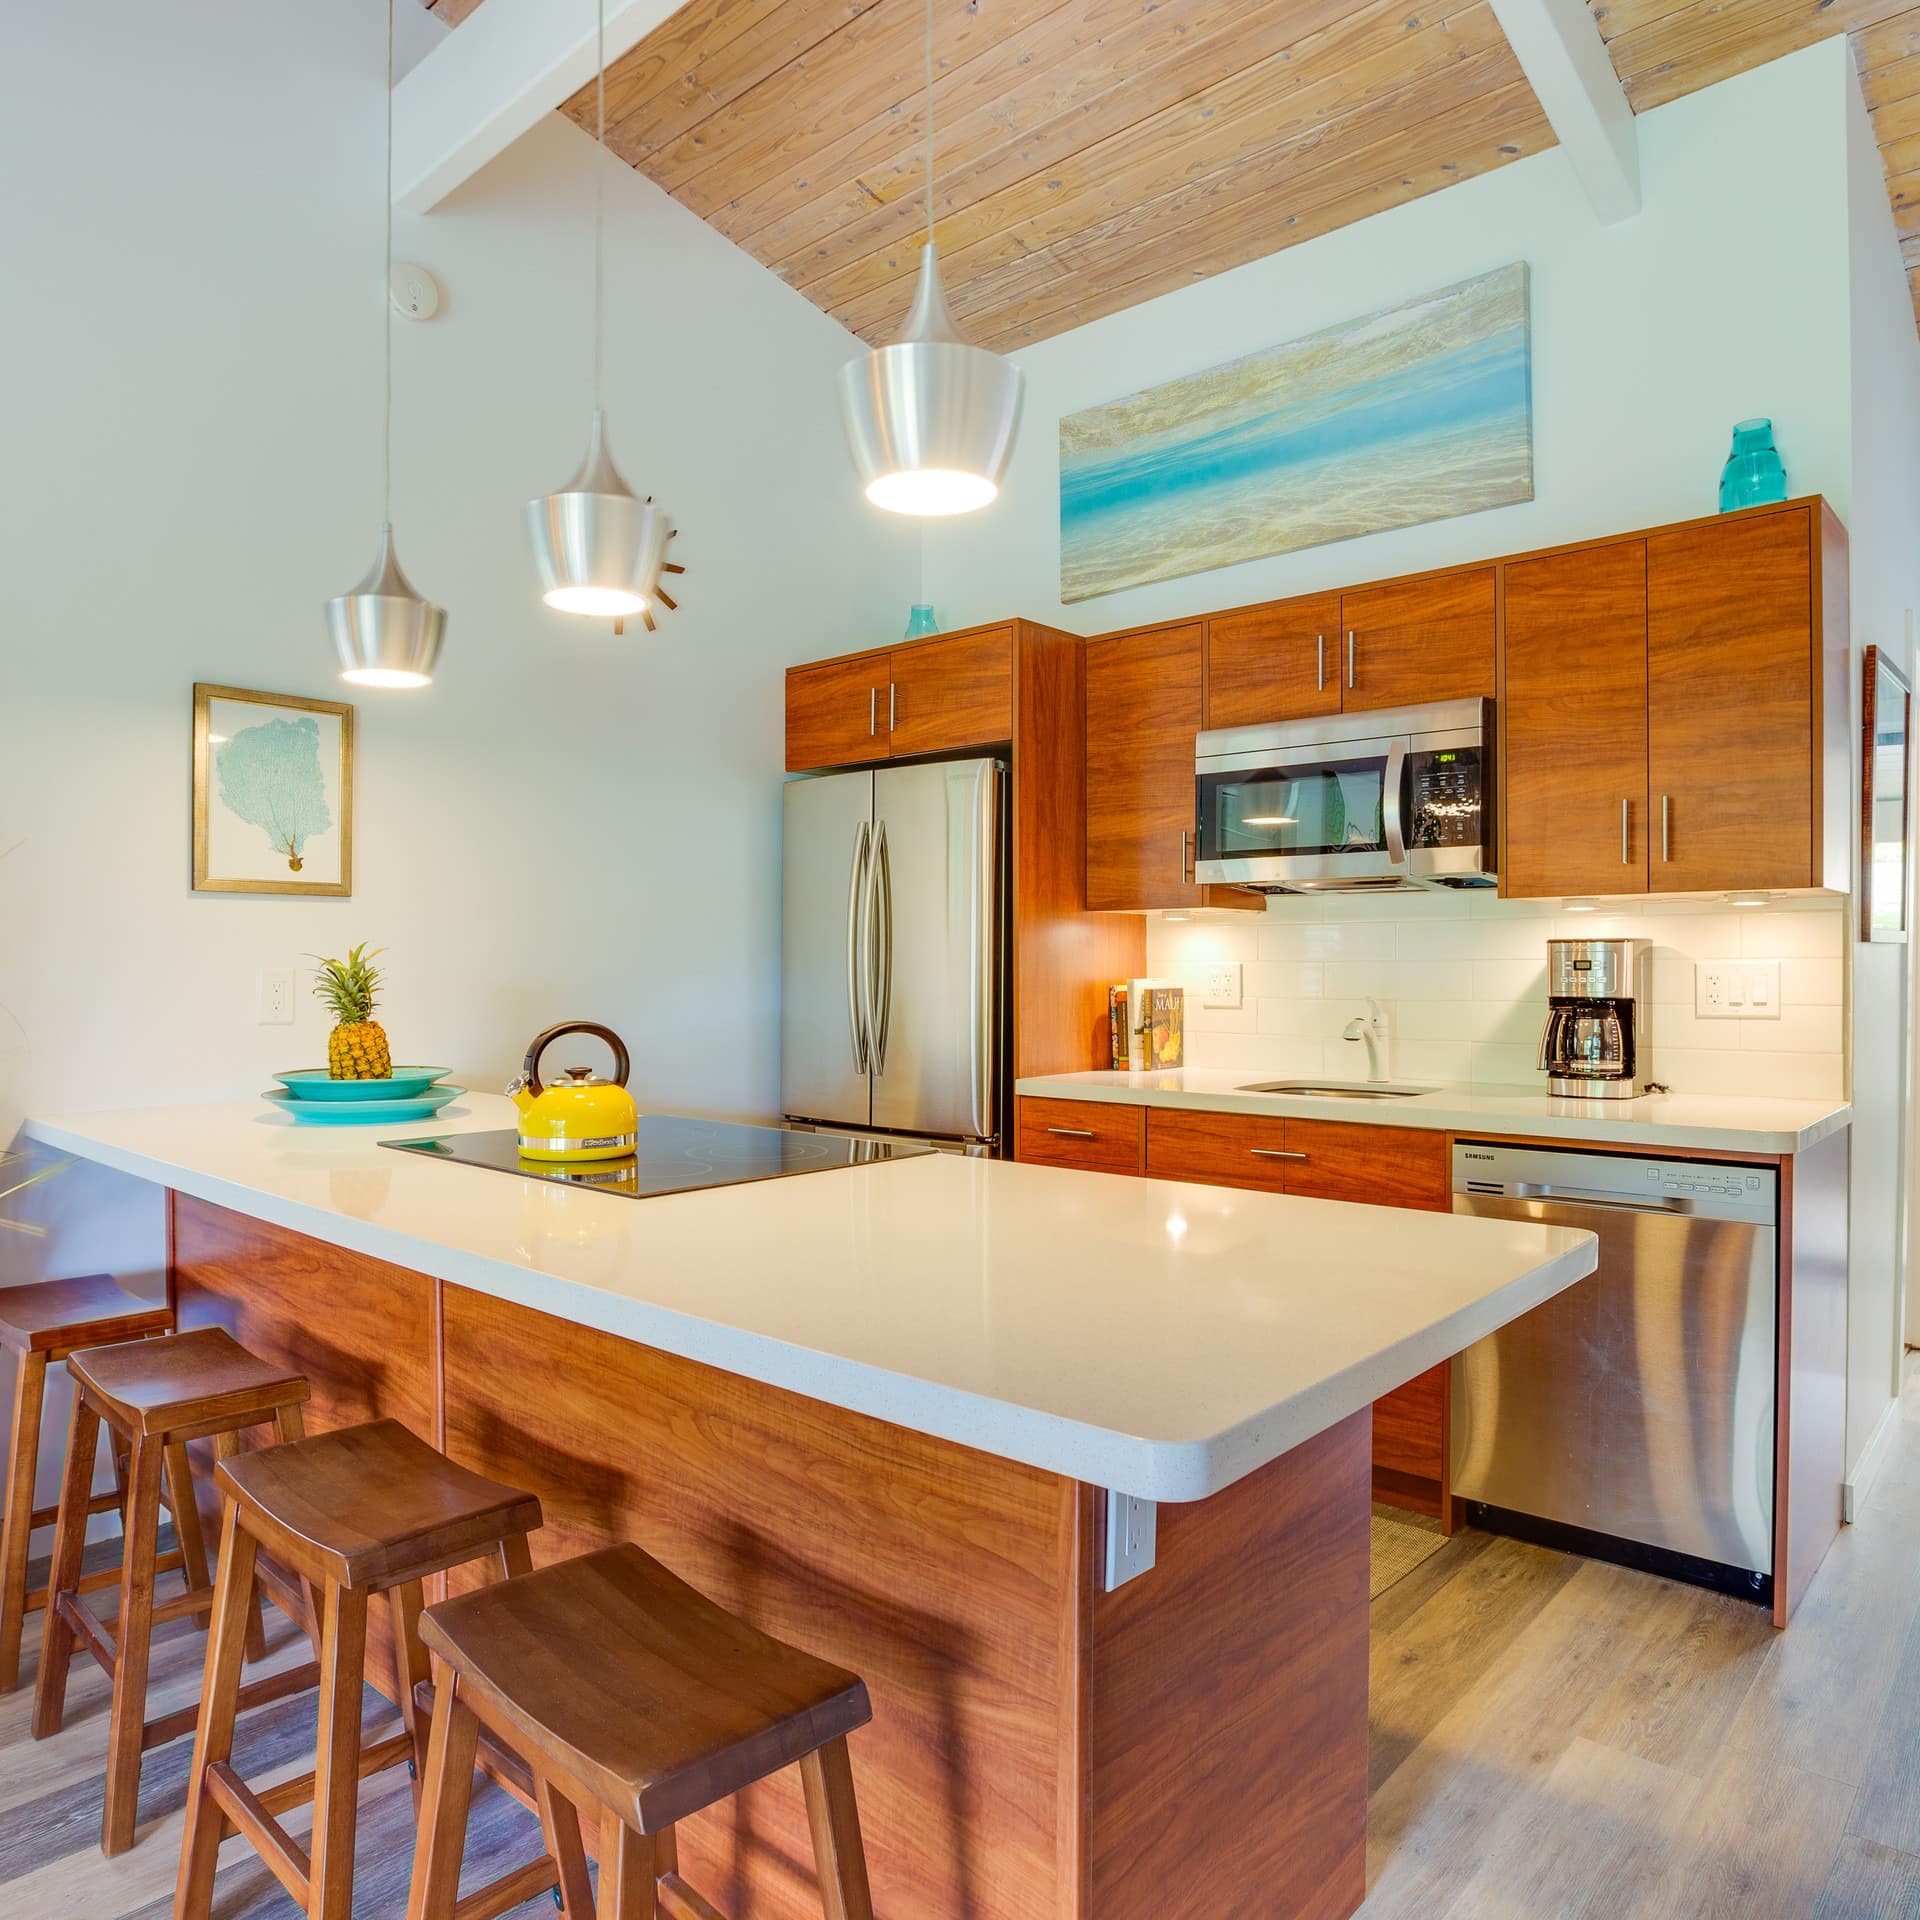 Stylish and affordable apartment with beach décor and wood kitchen in Maui